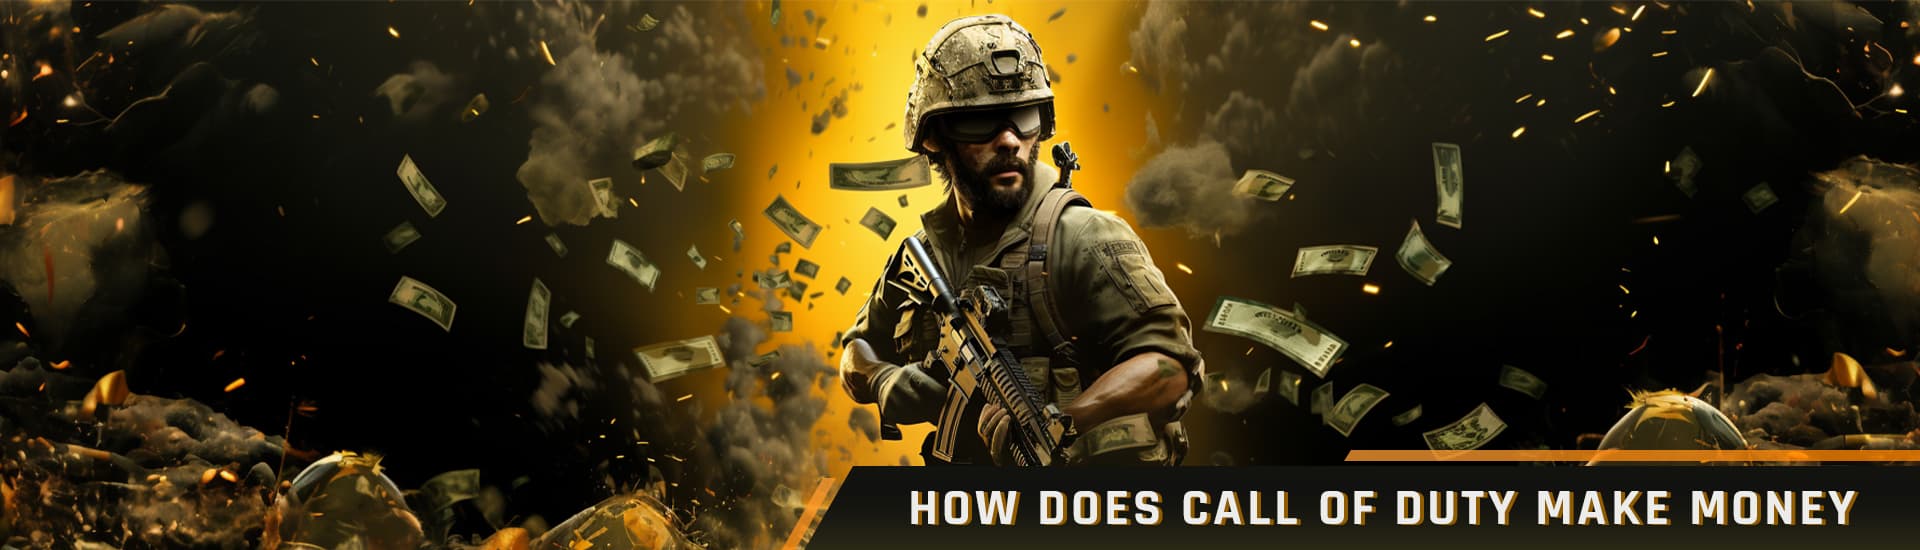 Call of Duty®  Best-Selling Video Game Franchise